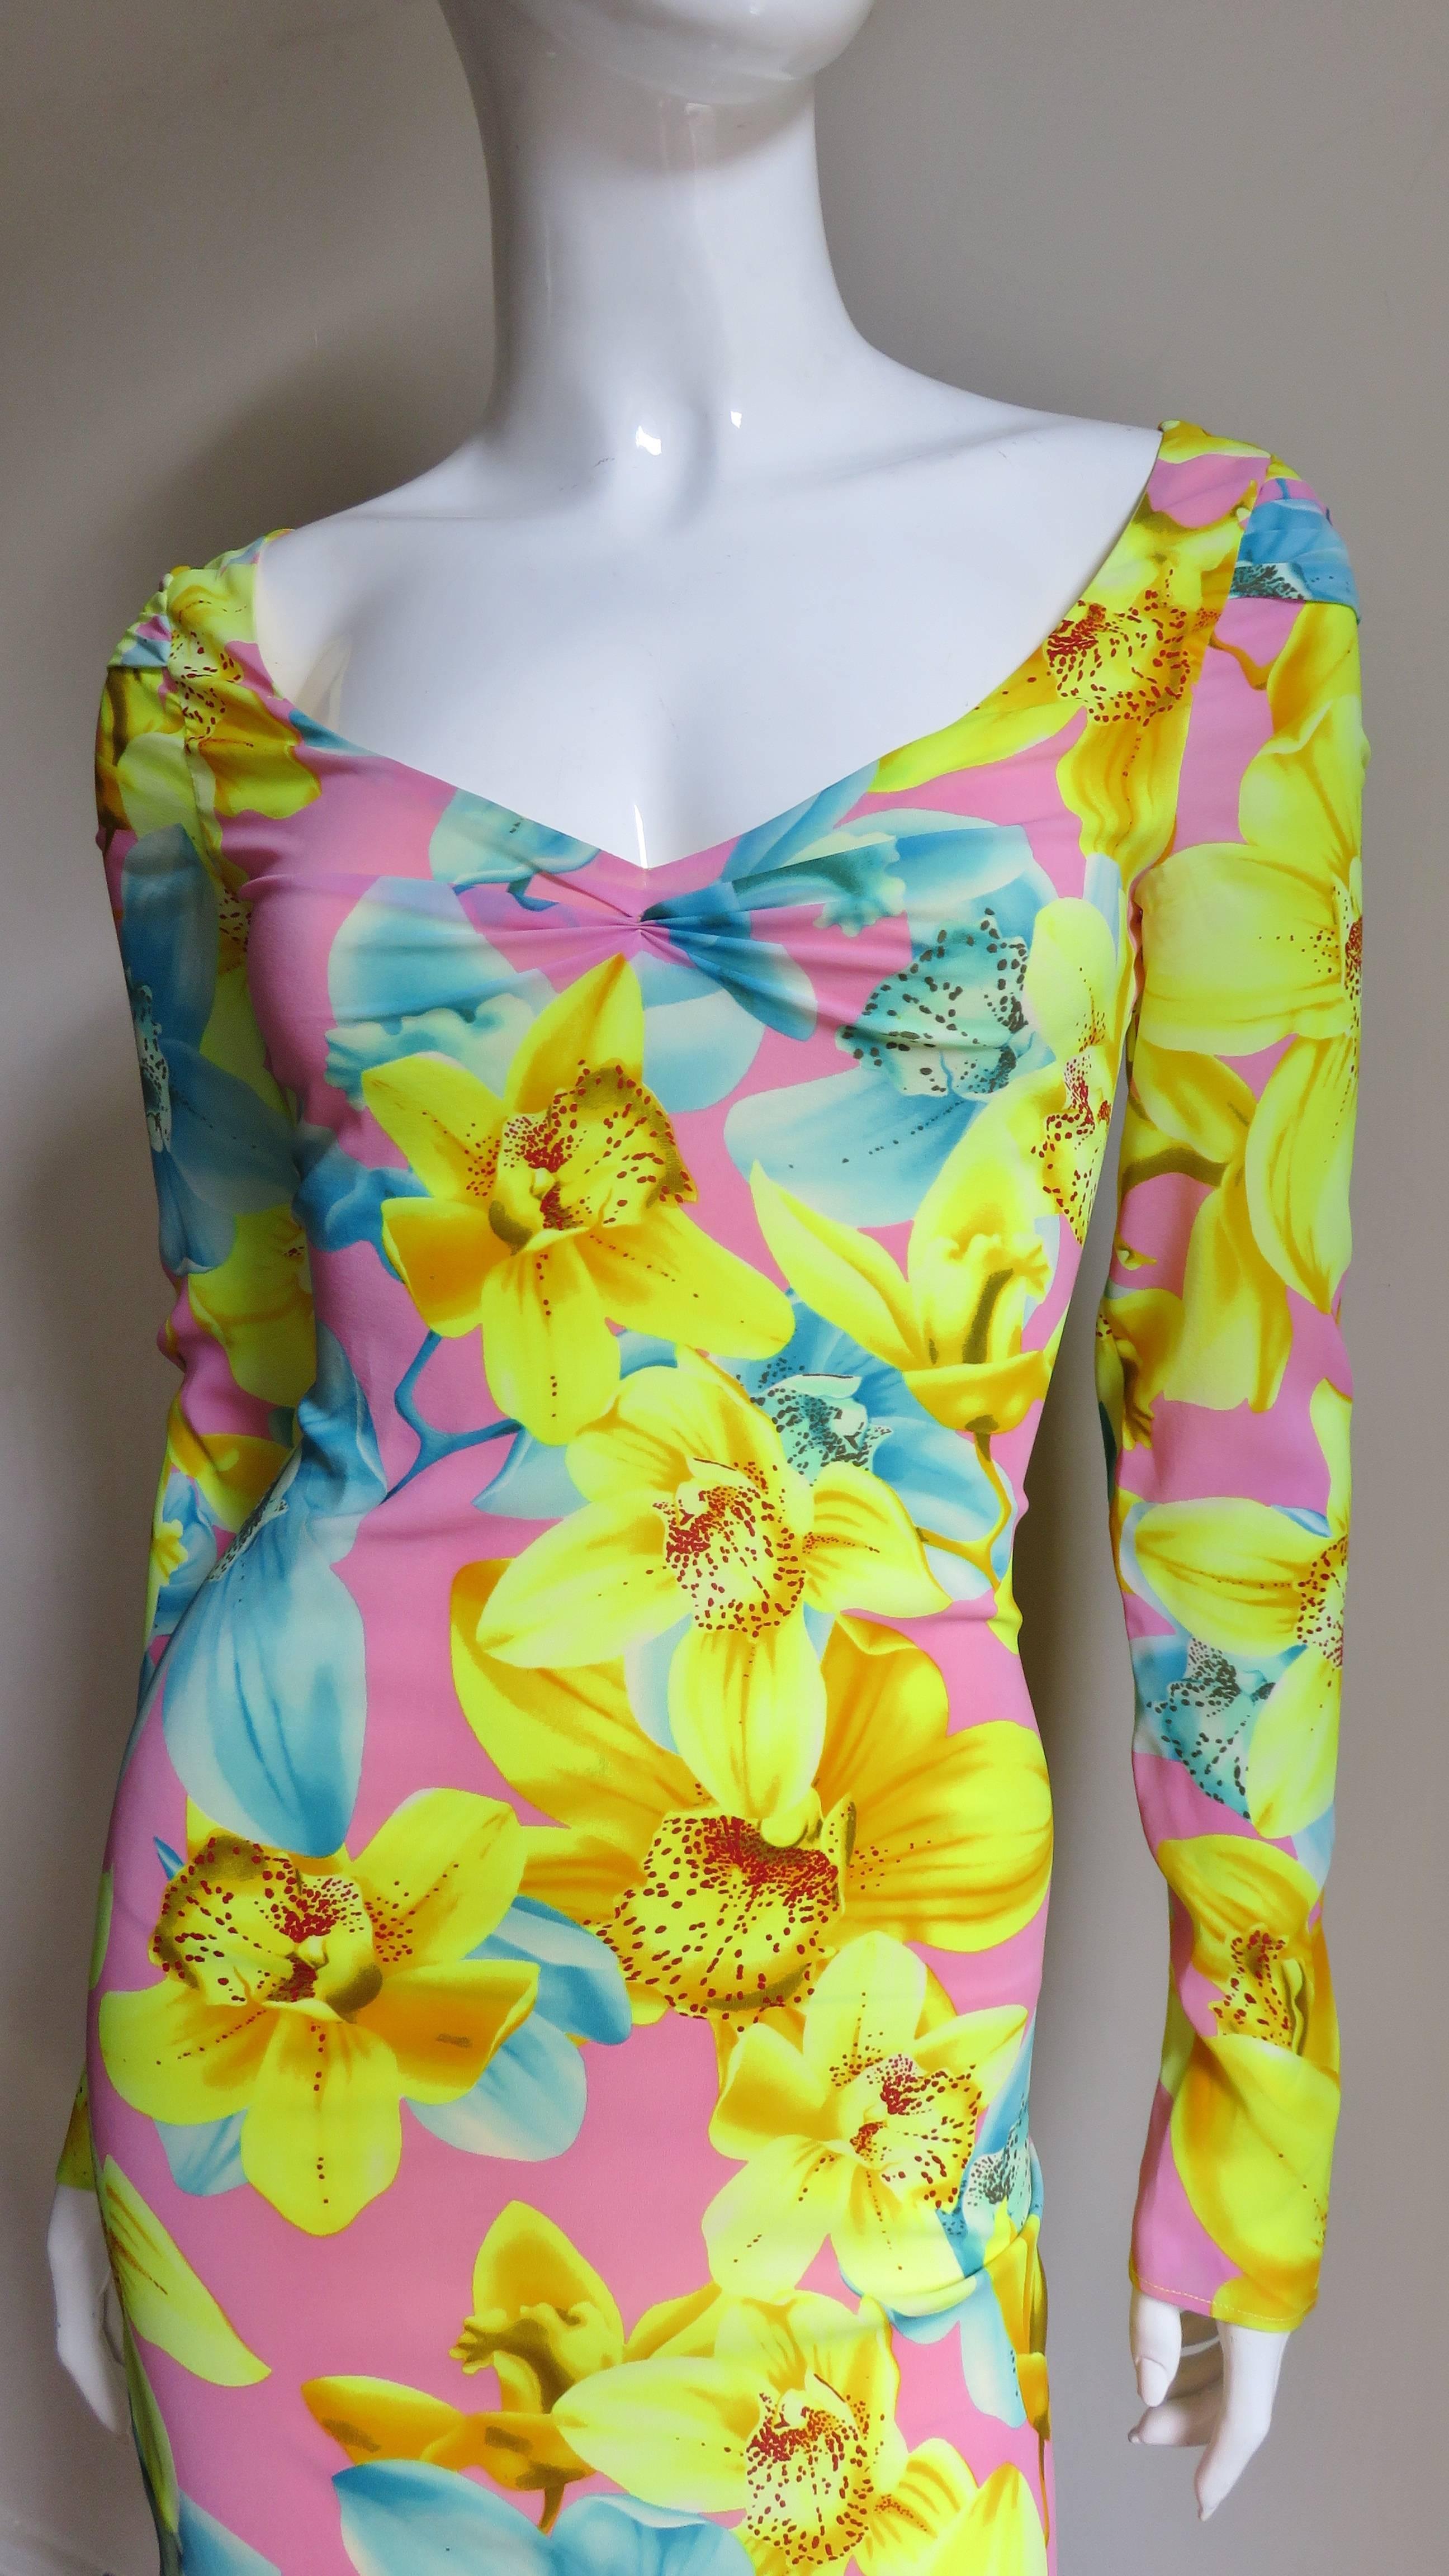 A beautiful fine silk knit dress from Versace in bright yellow, orange and turquoise flowers on a pink background.  It has long sleeves and is fitted with a front and back scoop neckline.  The front neckline has slight center gathering, the back has